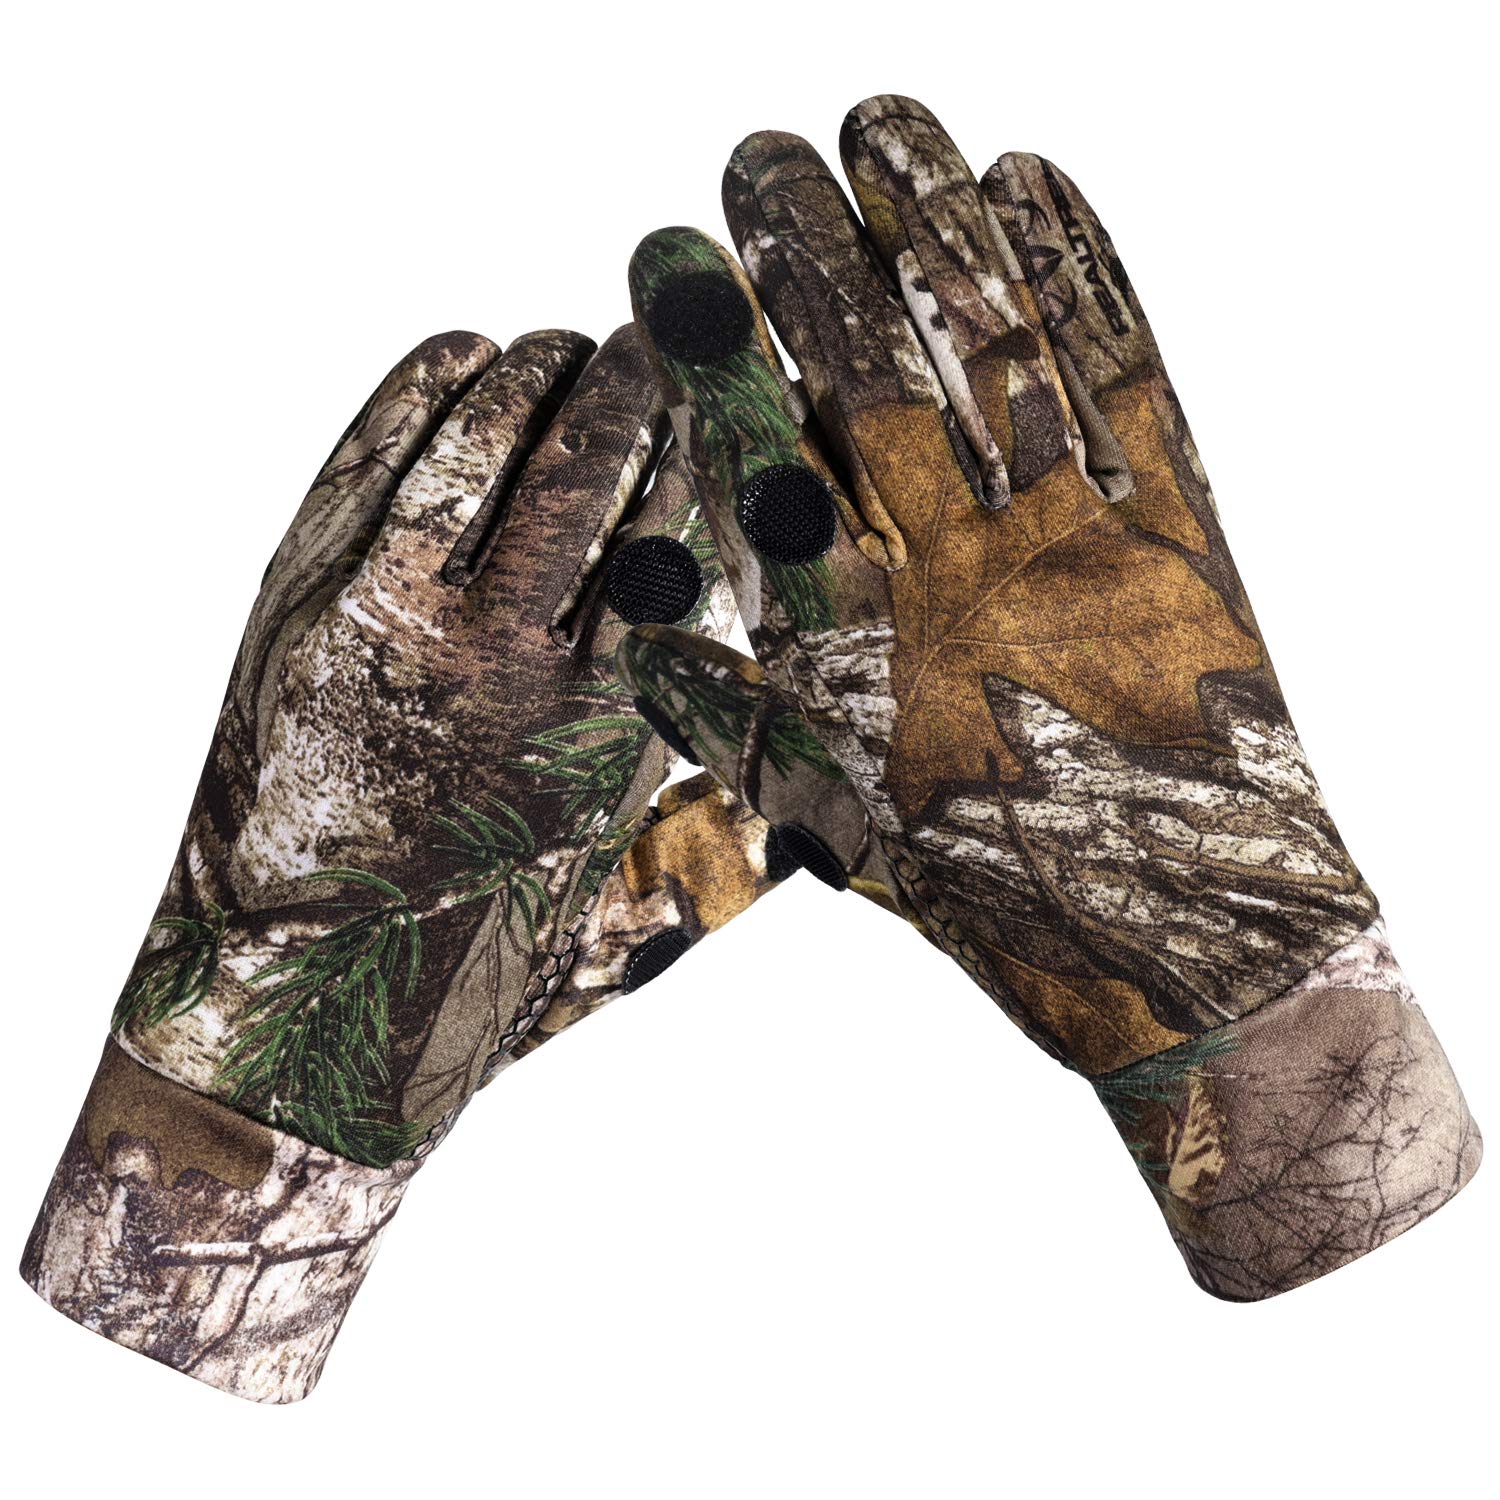 EAmber Camouflage Hunting Gloves Full Finger/Fingerless Gloves Pro Anti-Slip  Camo Glove Archery Accessories Hunting Outdoors with Fleece Large